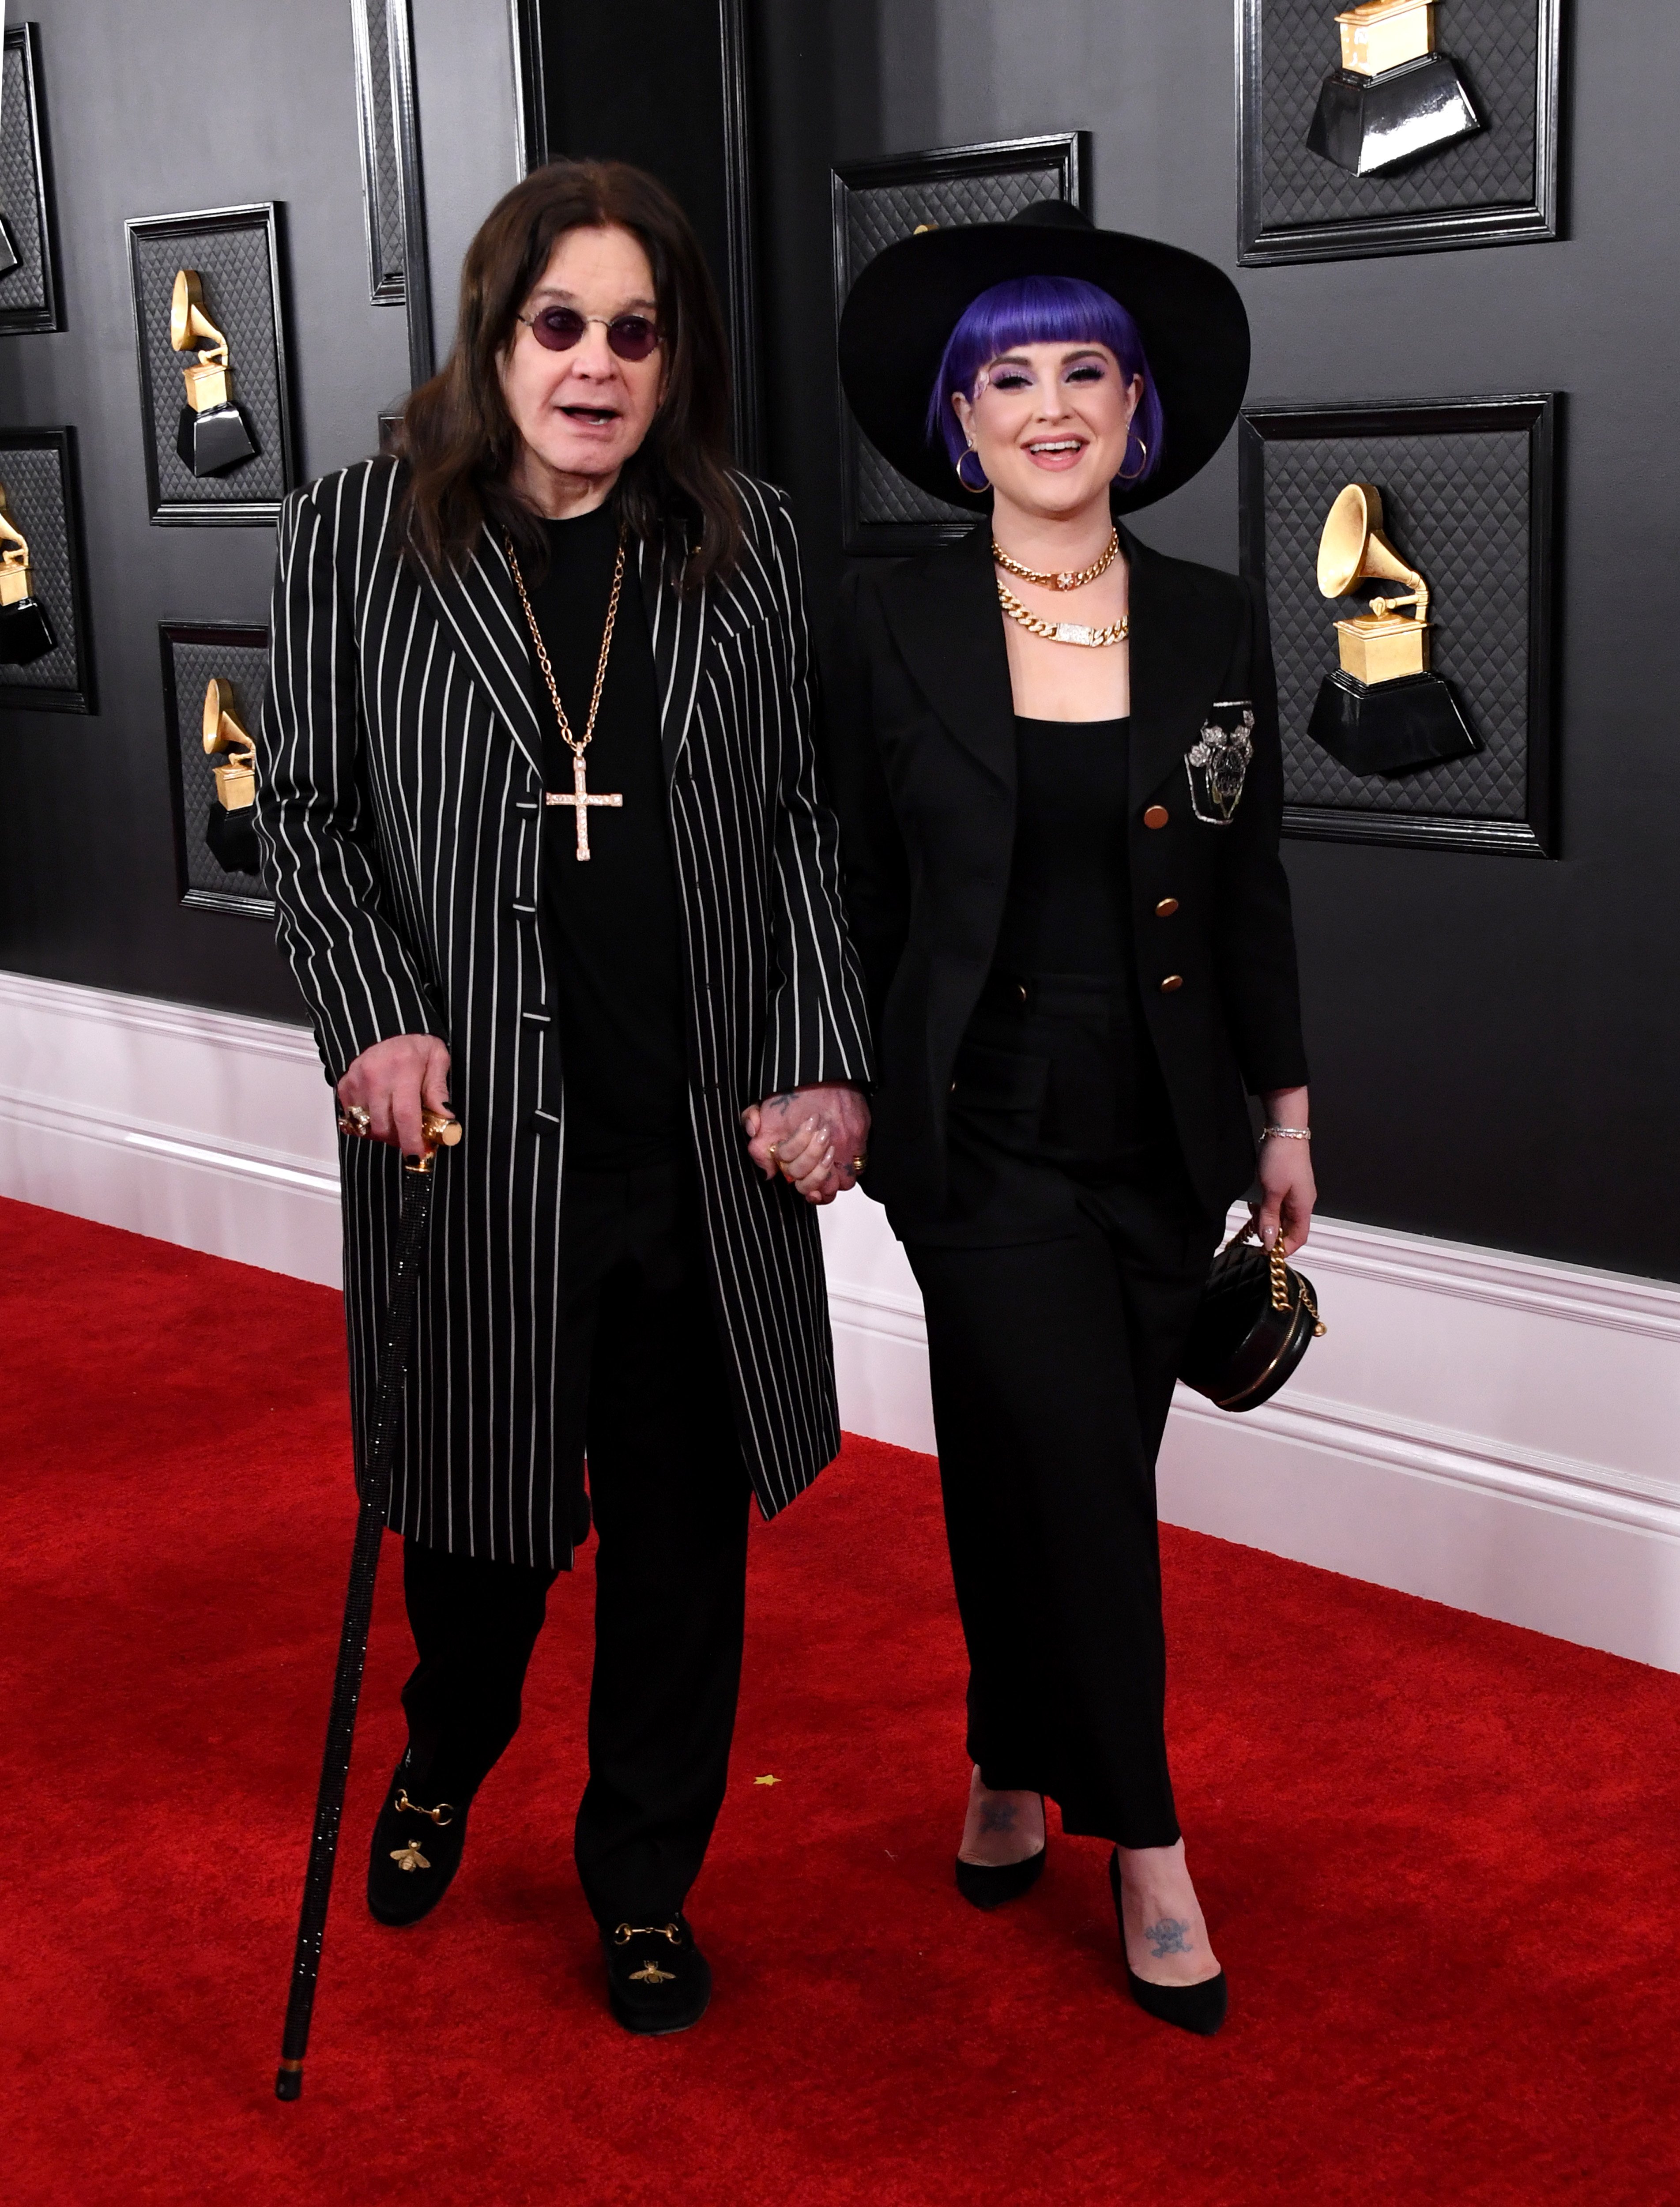 Ozzy and Kelly Osbourne at the 62nd Annual Grammy Awards on January 26, 2020, in Los Angeles, California | Source: Getty Images